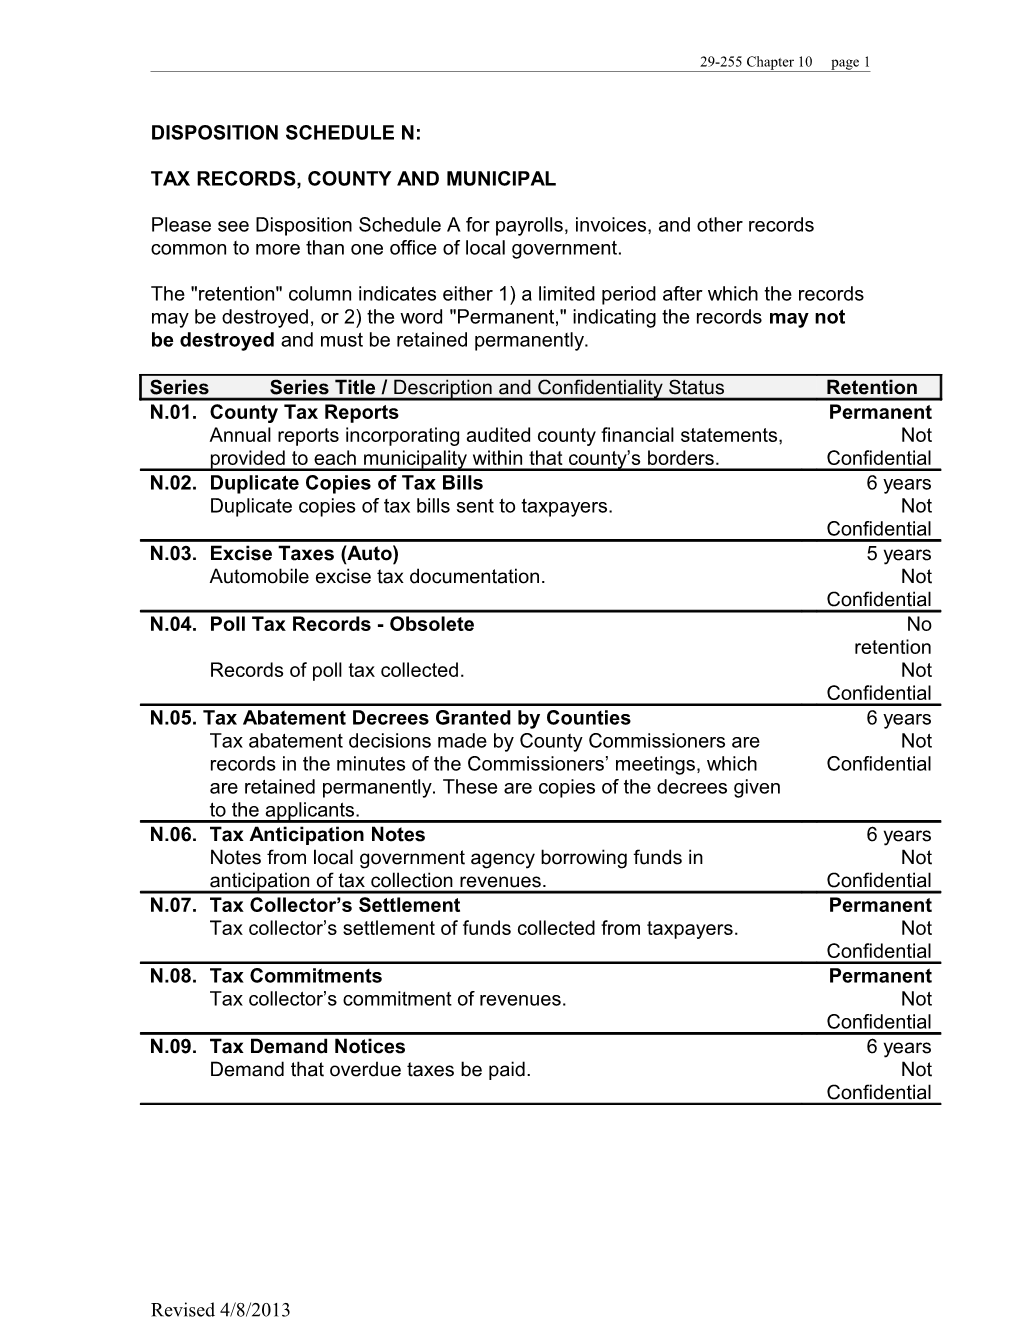 Tax Records, County and Municipal